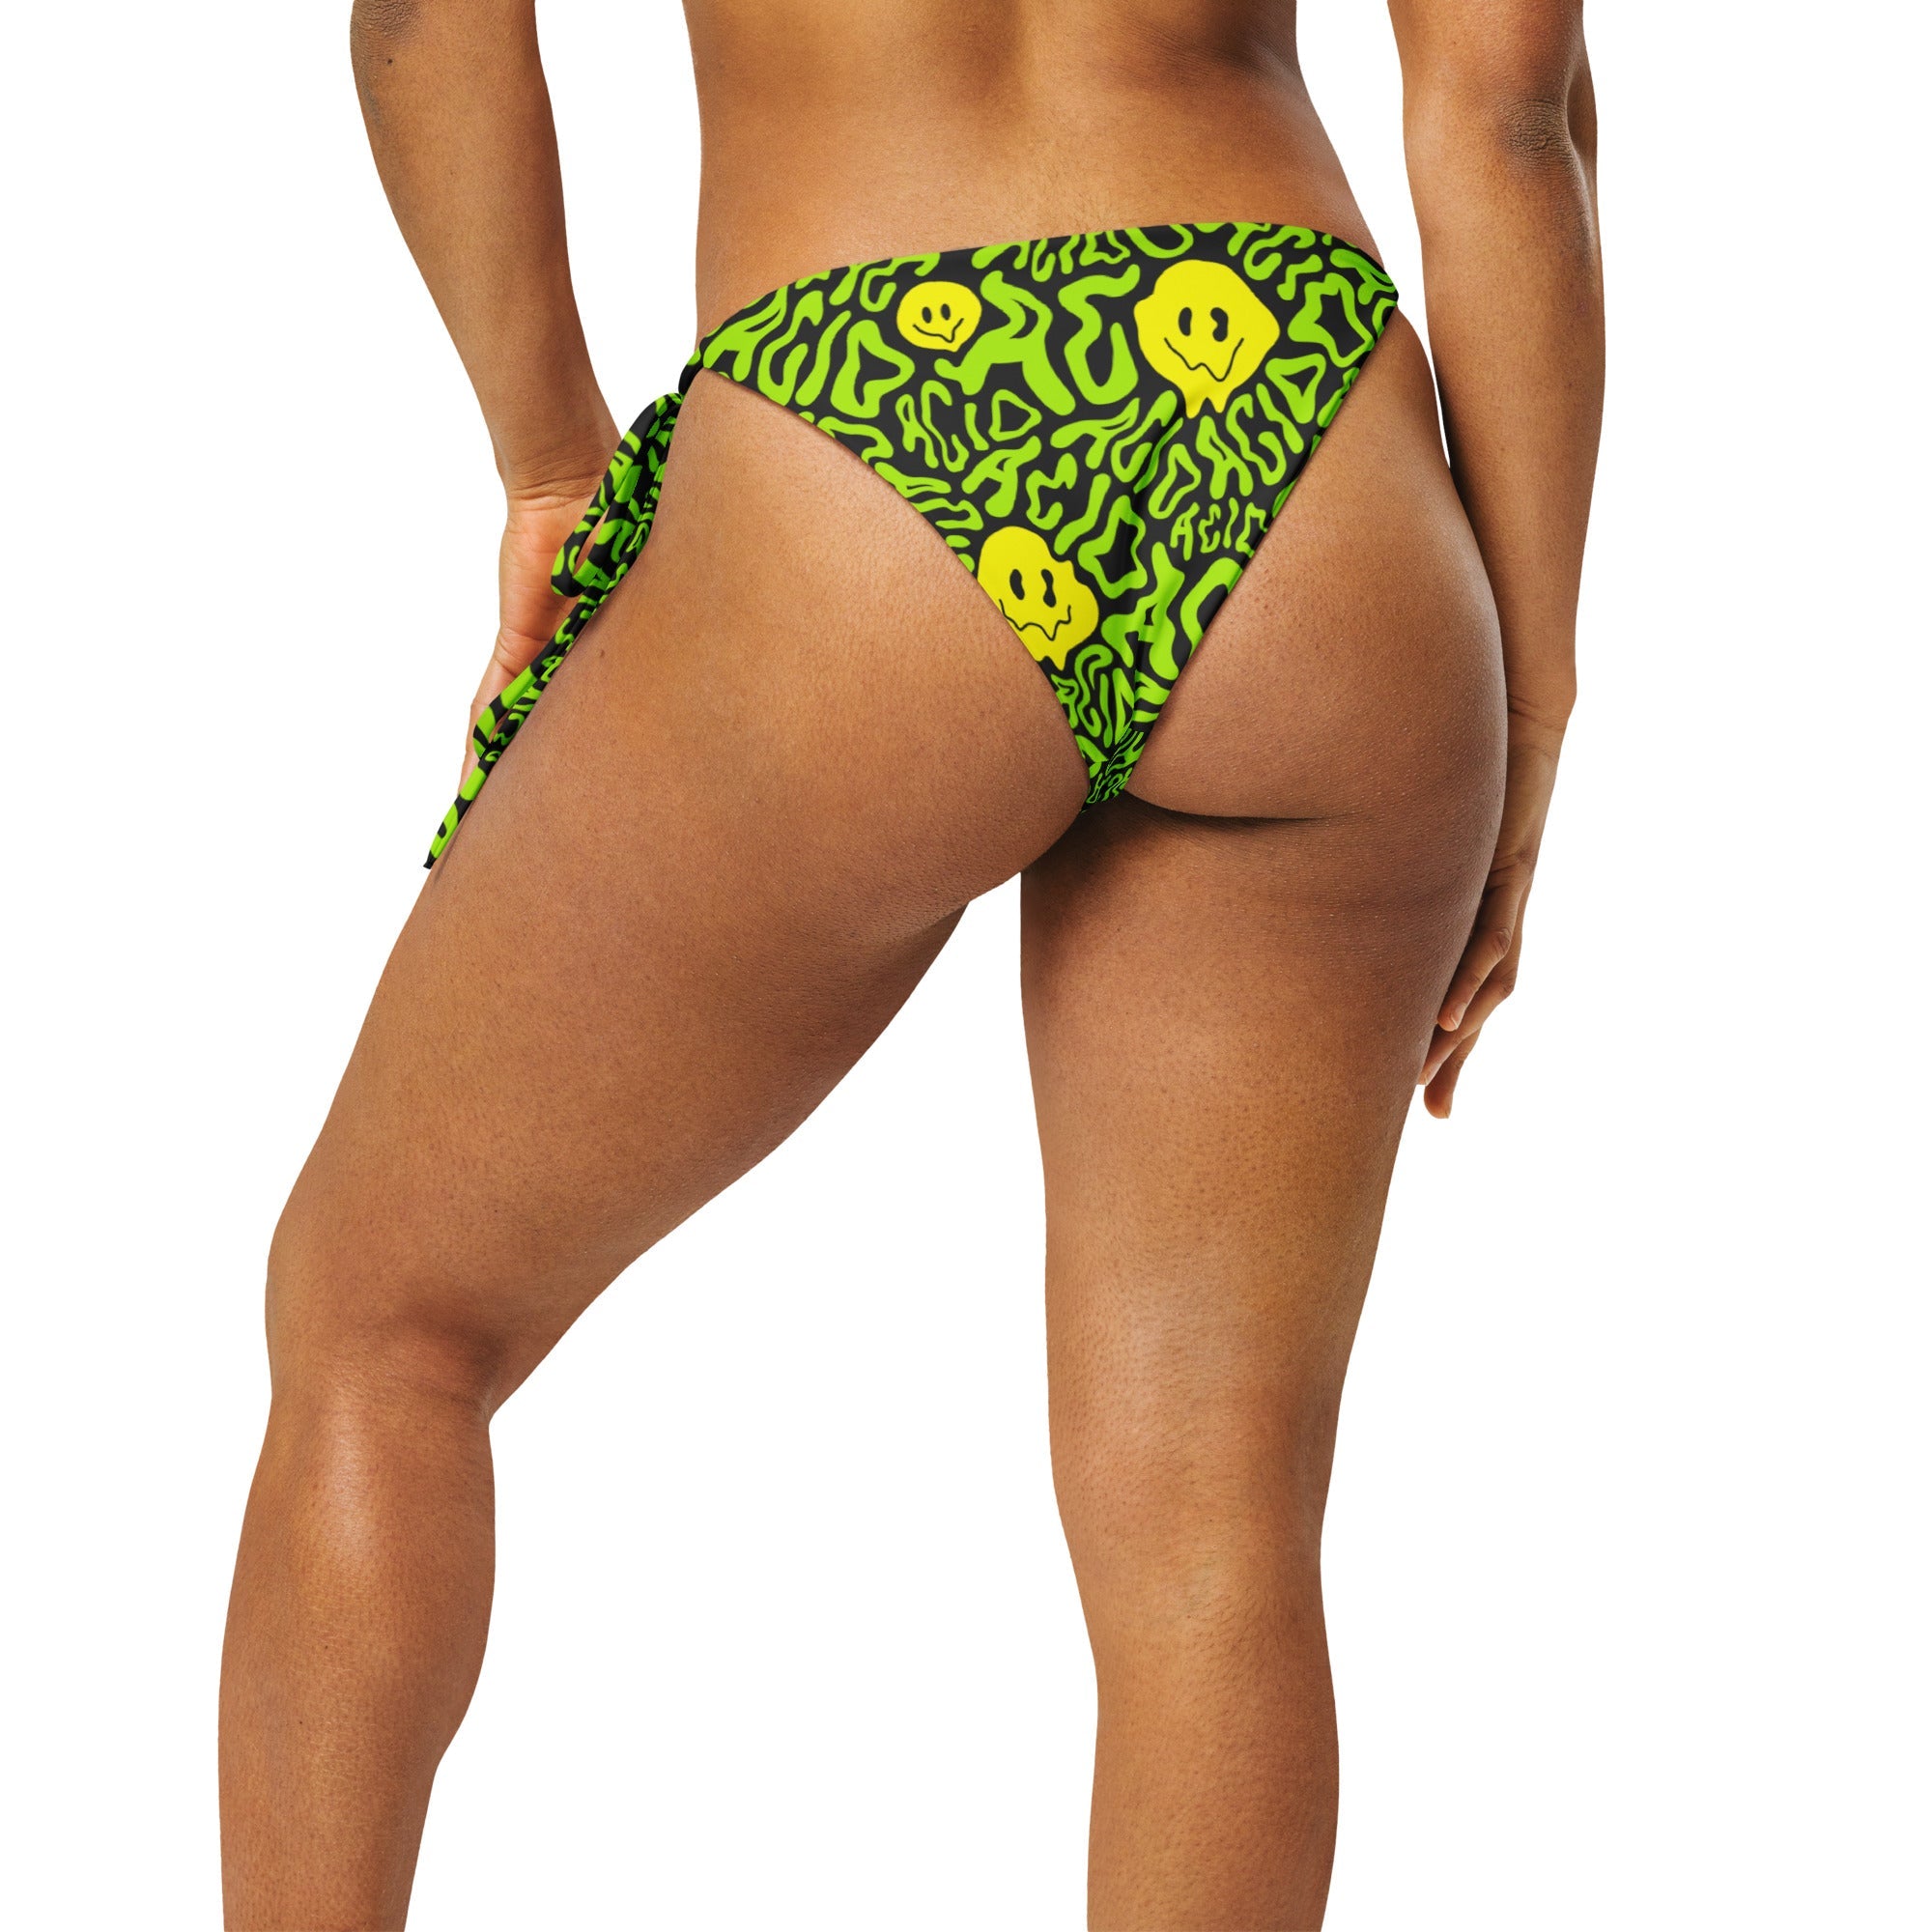 Model showing off the back of the Acid Smilez String Bottoms by One Stop Rave.